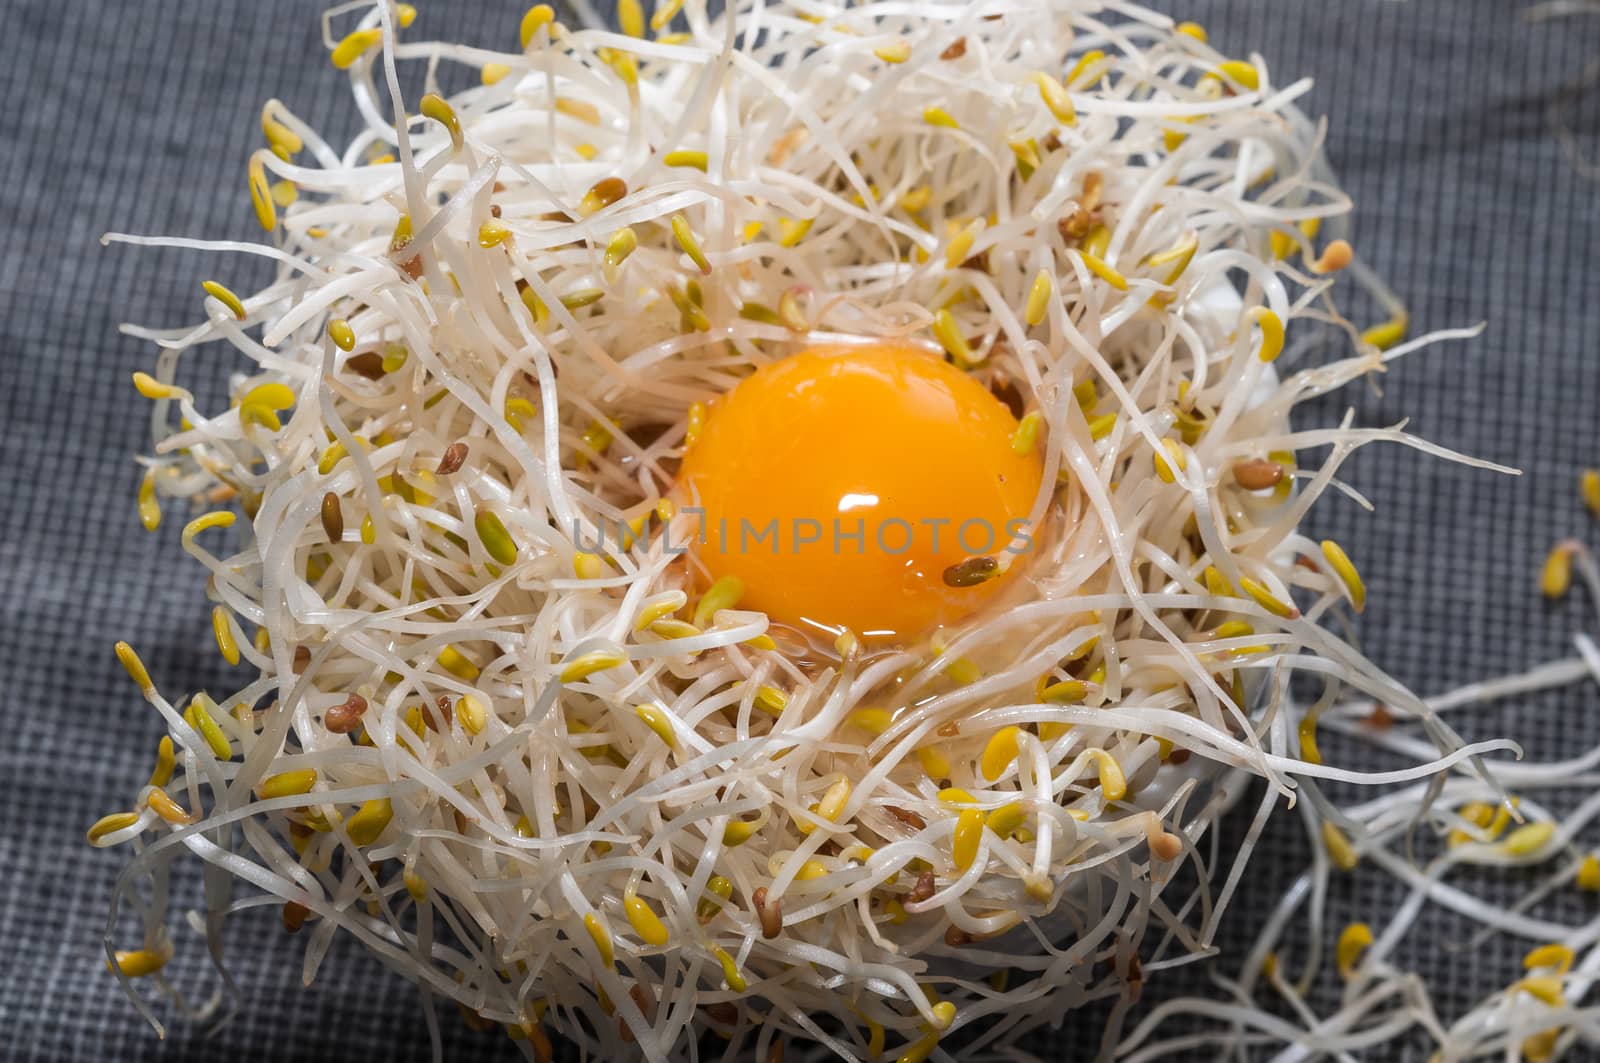 Nest of alfalfa sprouts
with the yolk of a quail egg on a tablecloth